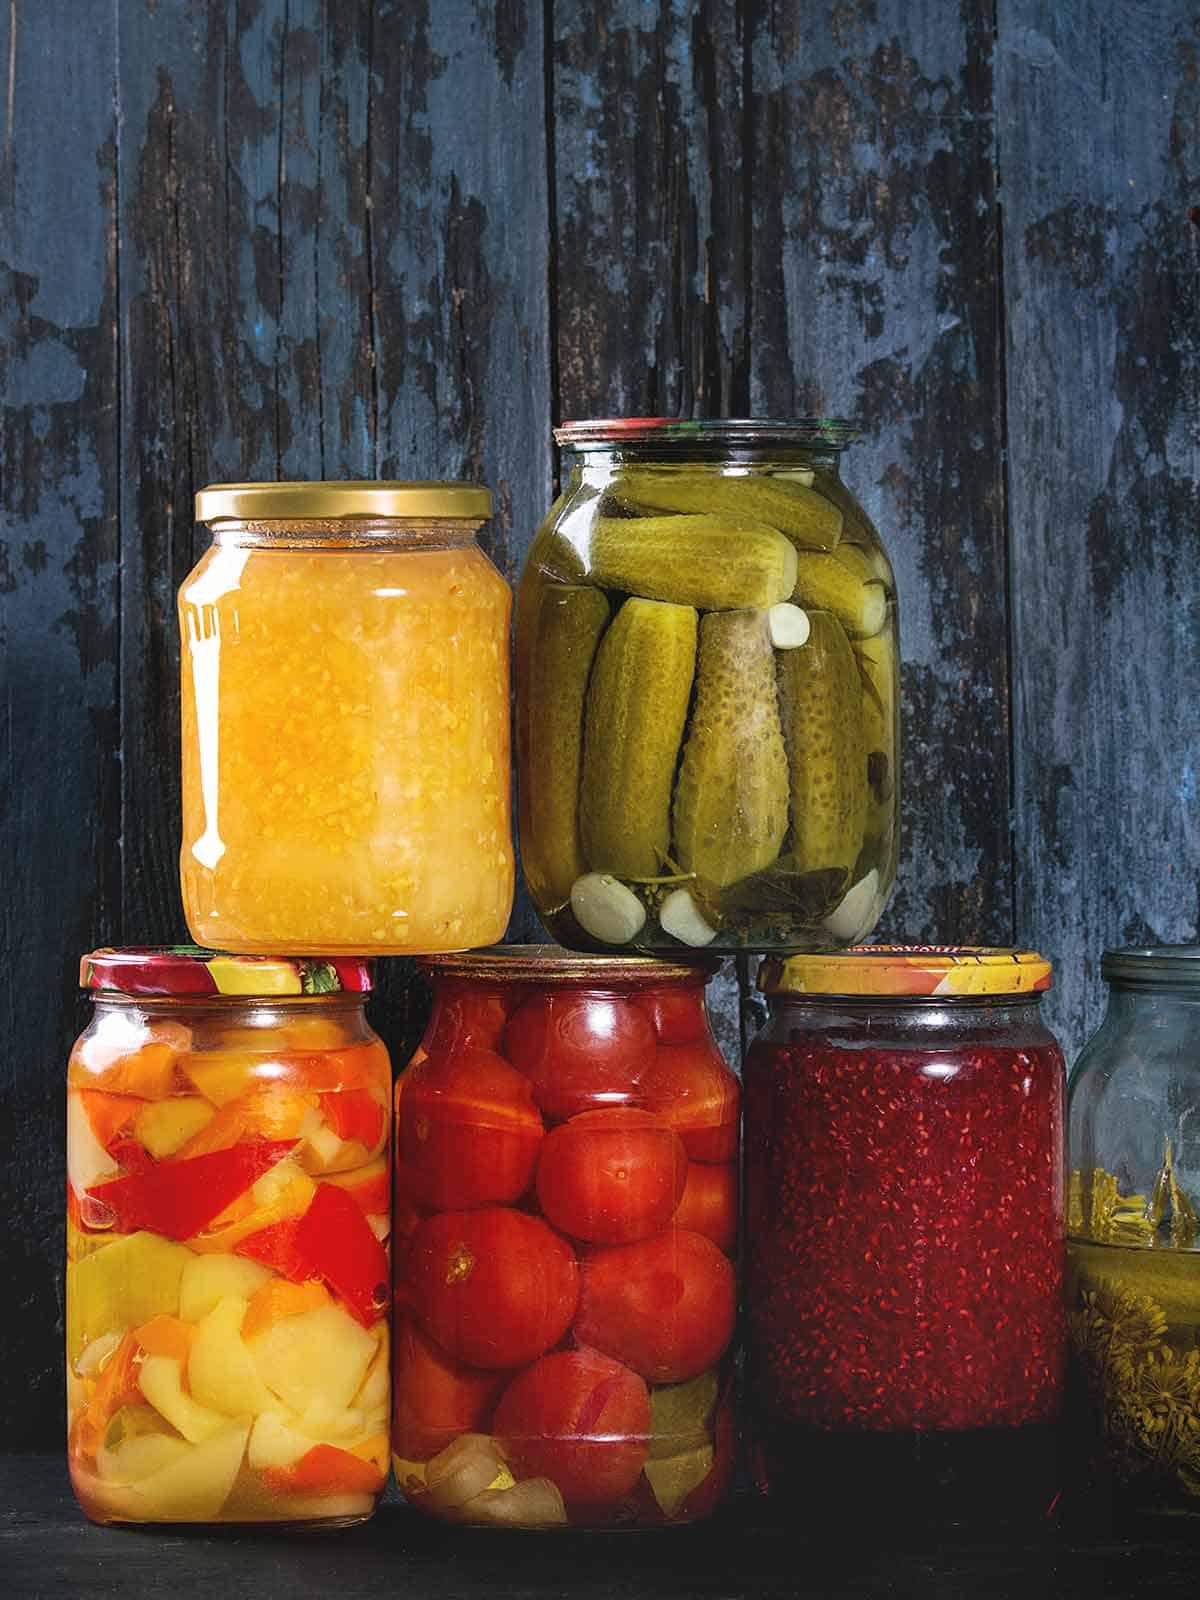 How to Make Pickles at you home